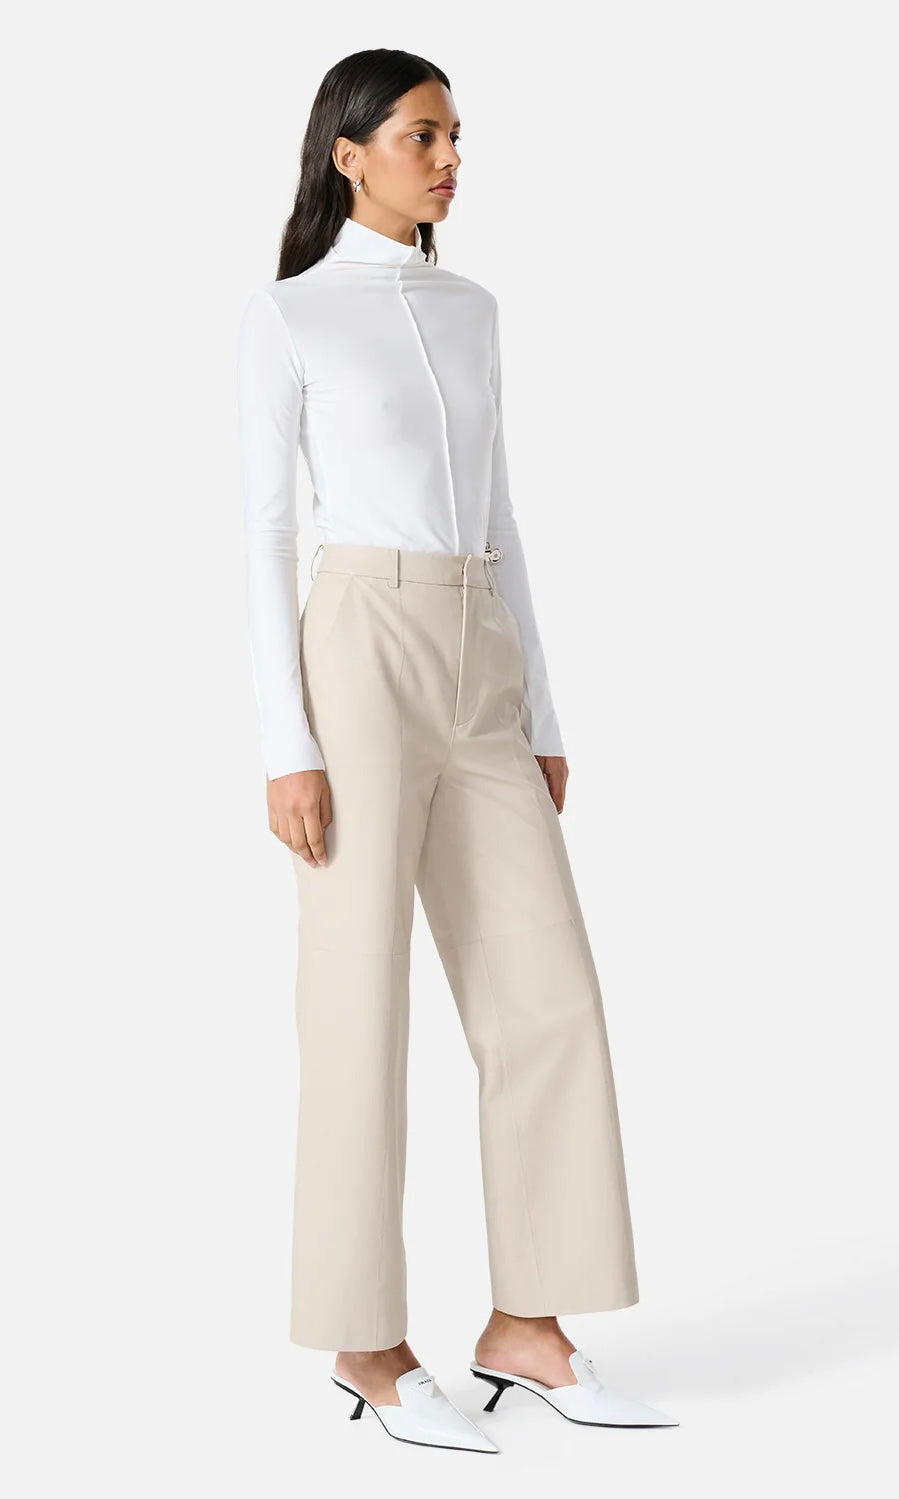 Ena Pelly Stanford Leather Pant In Turtledove